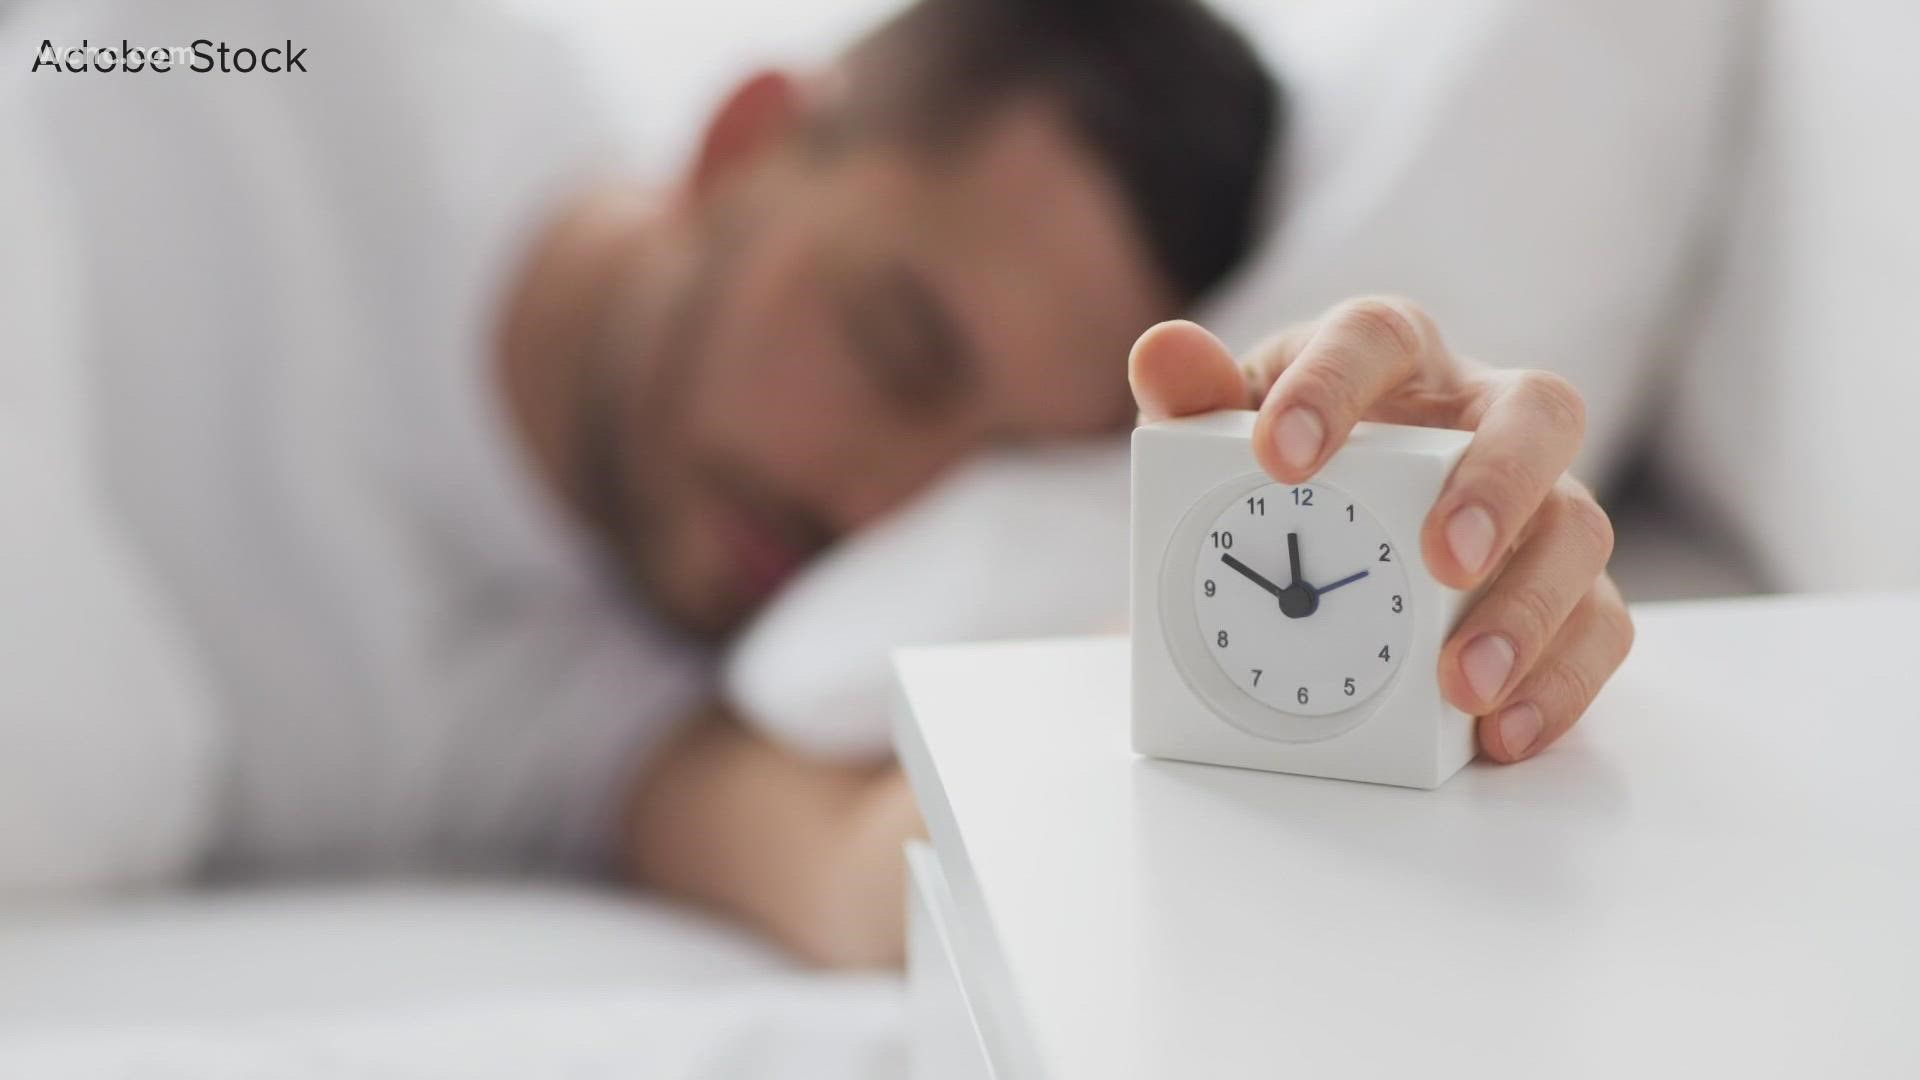 Daylight Saving Time is here, and waking up might've been a little harder for you after the time change. But is it true we get less sleep after moving our clocks?